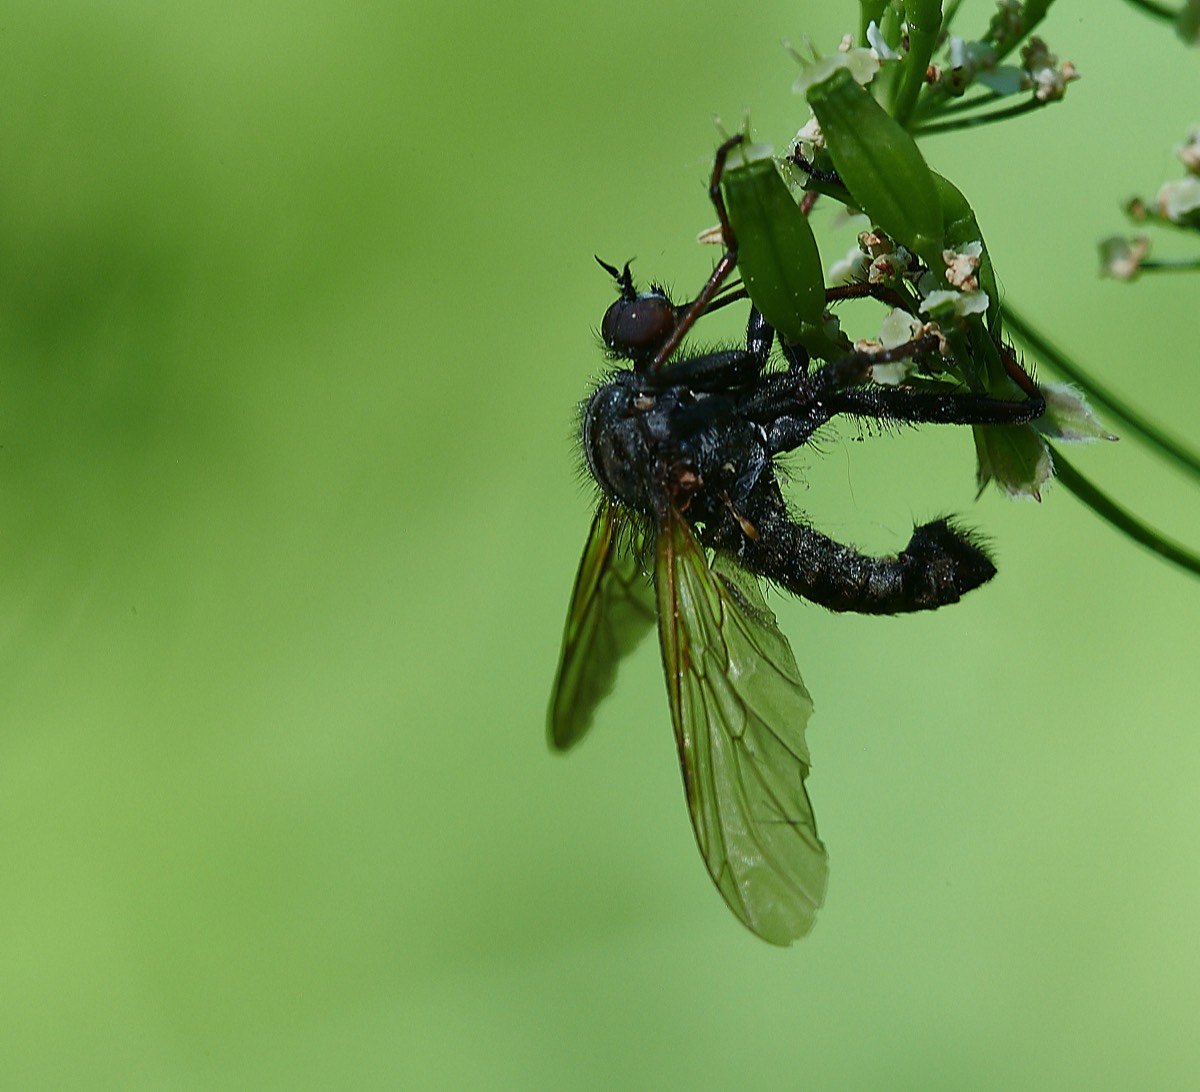 A fungus killed the Fly - Foxley Wood 13/06/21